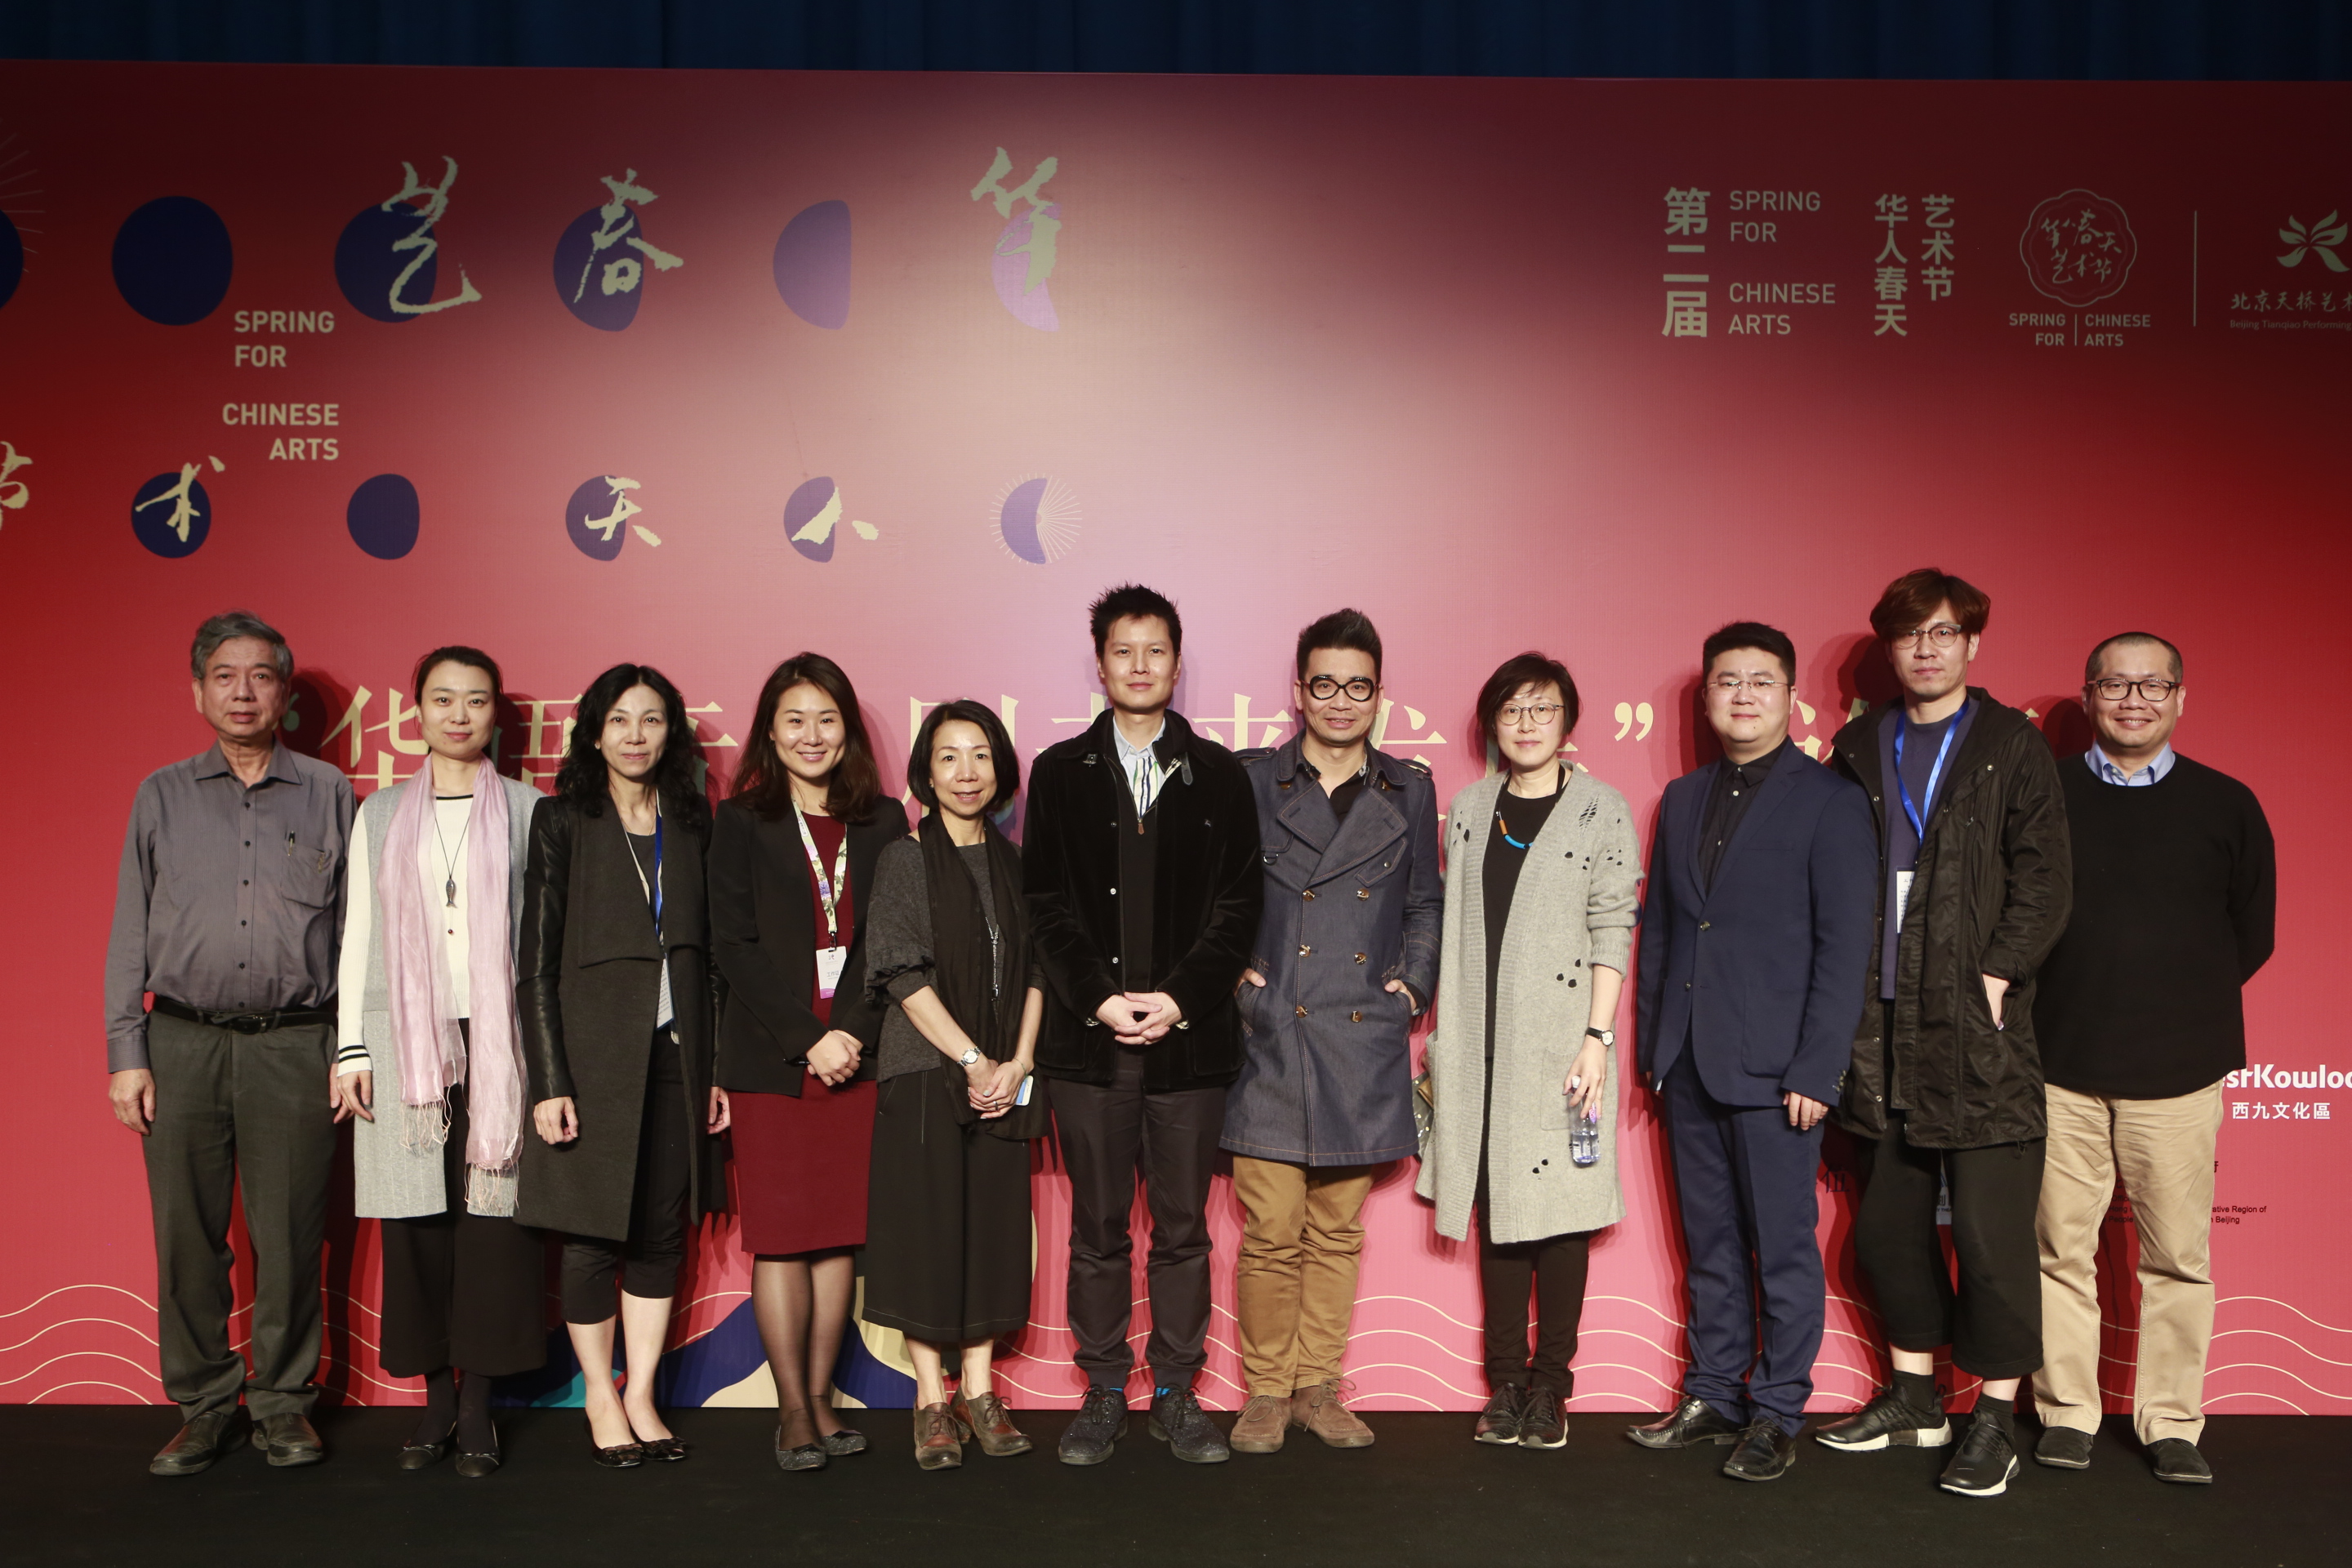 Participants attending a forum discussing the future of Chinese musicals, pose for a picture together at the close of the event on April 8, 2017. [Photo provided to China Plus].